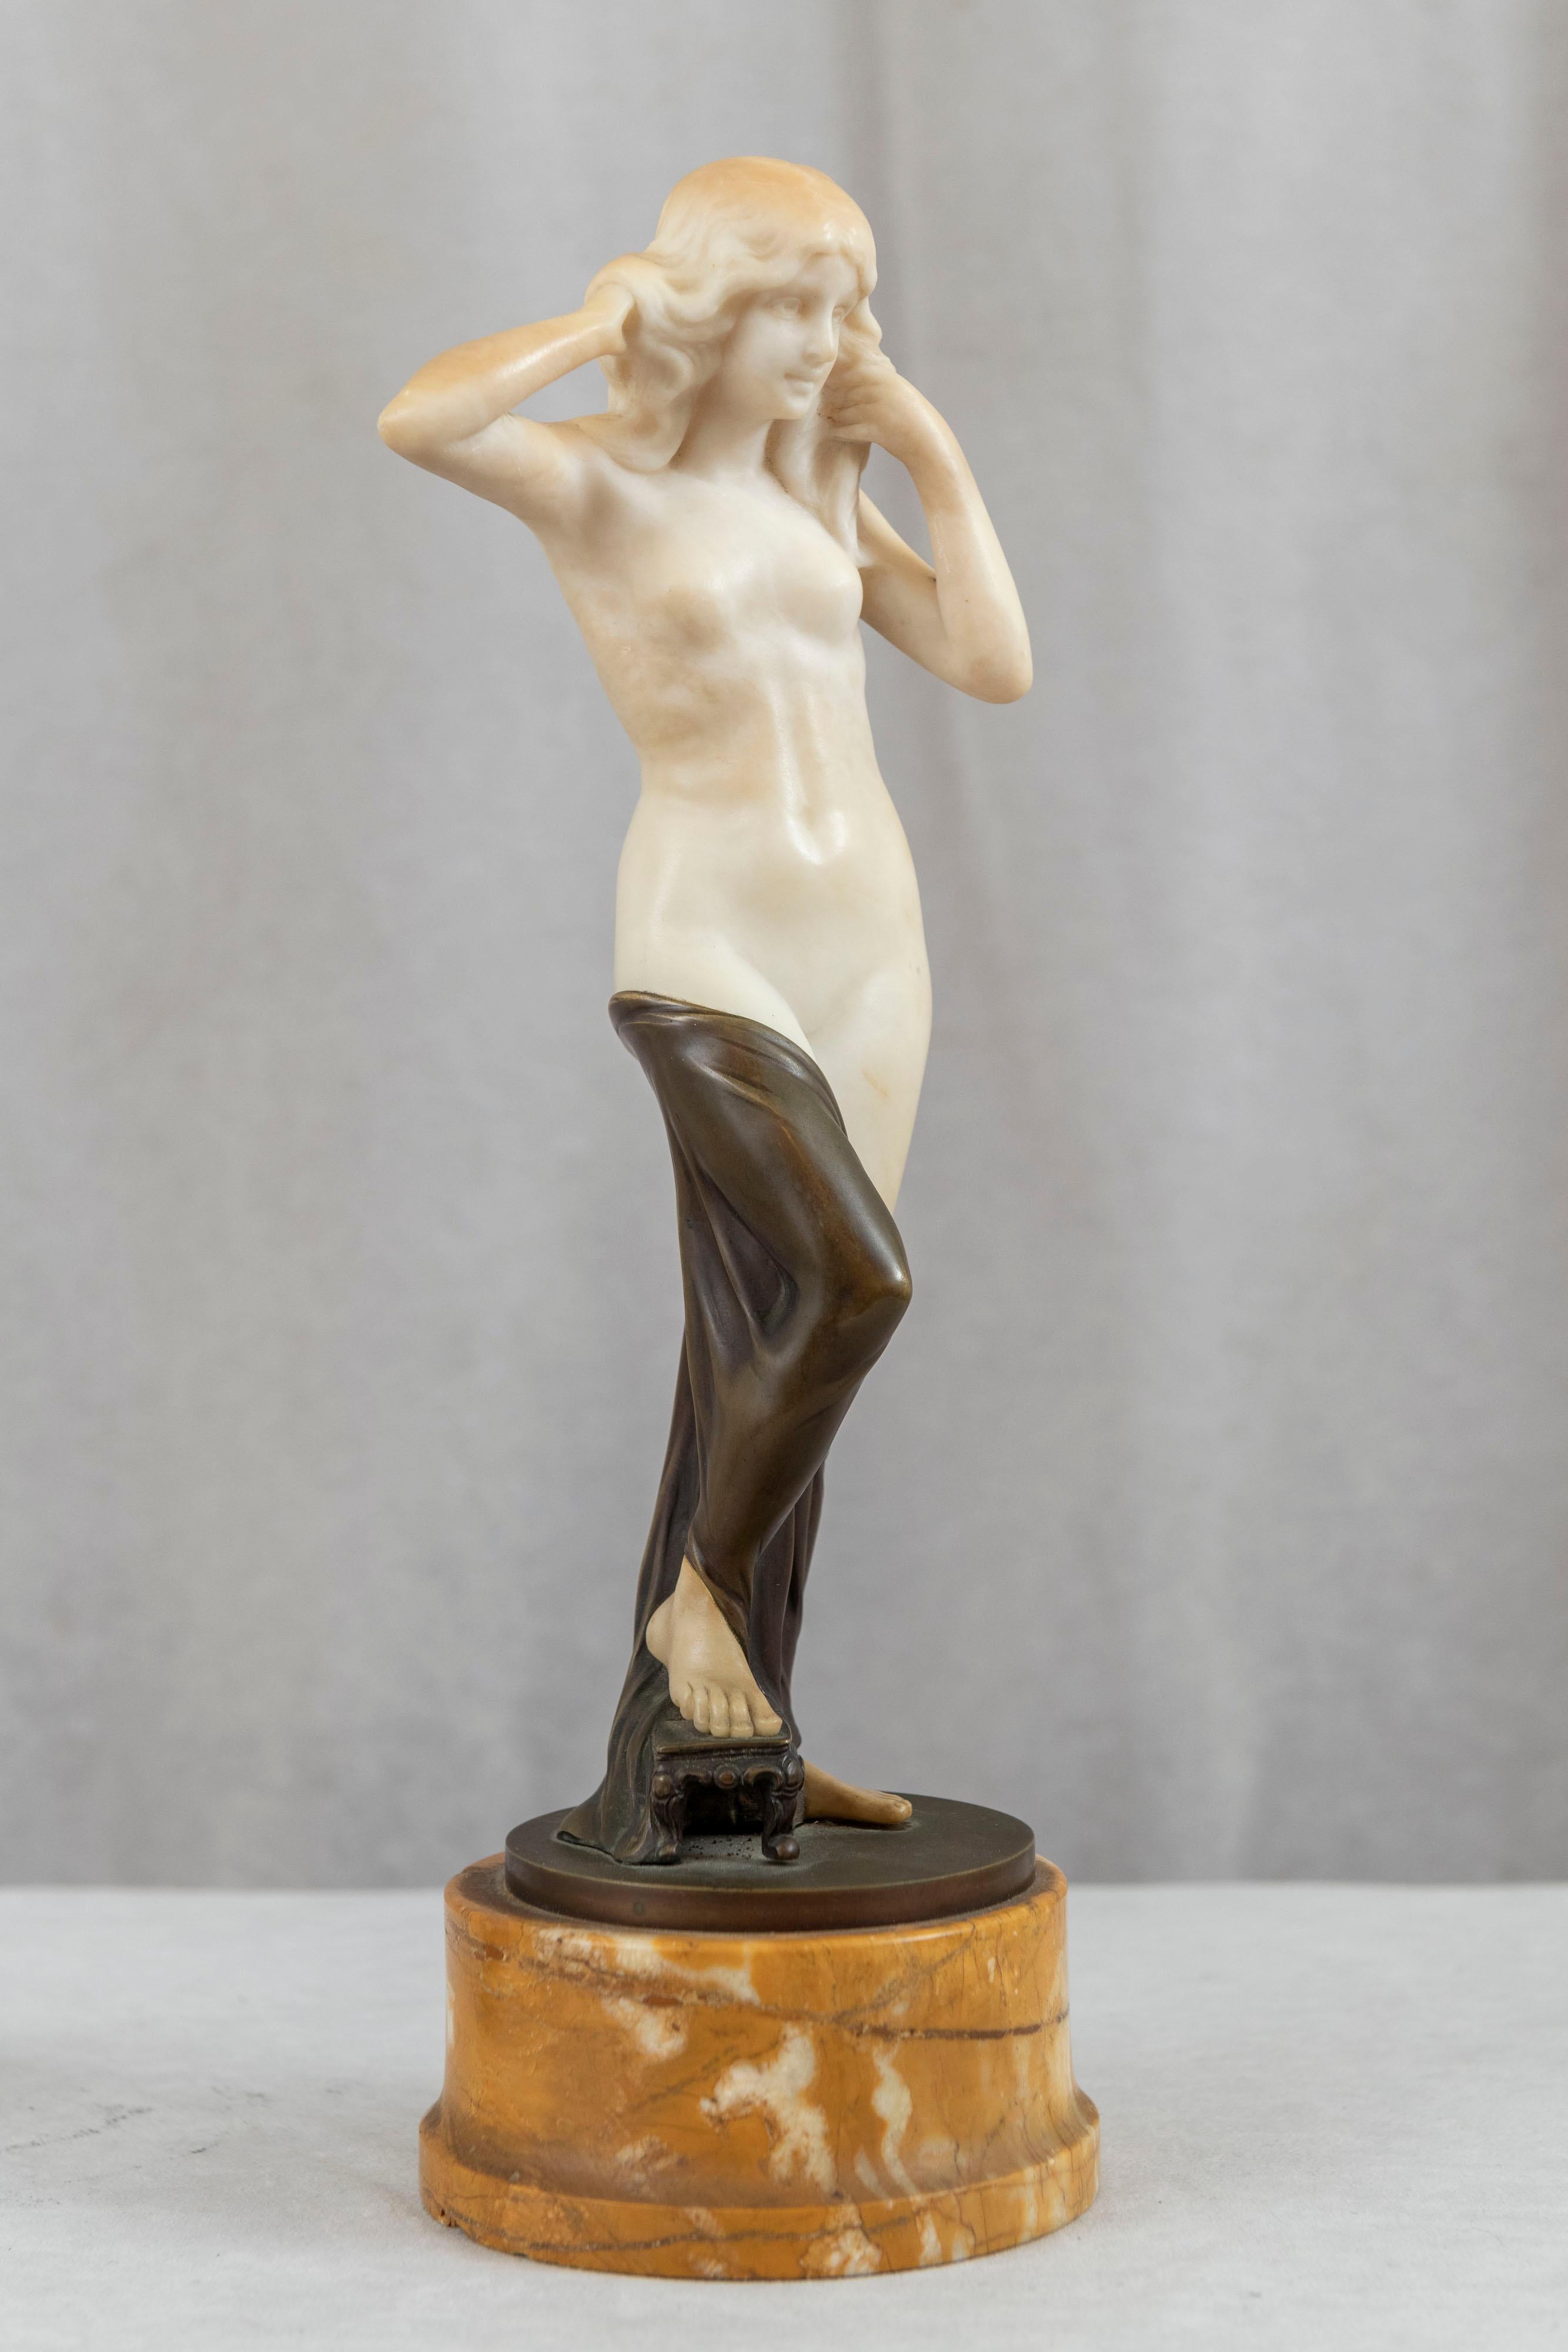 This sexy young nude maiden displays two mediums used to create a sculpture, cast bronze and hand carved alabaster. The white alabaster brings the statue to life, and is a nice addition to any statue of a female. The beautiful nude has flowing hair